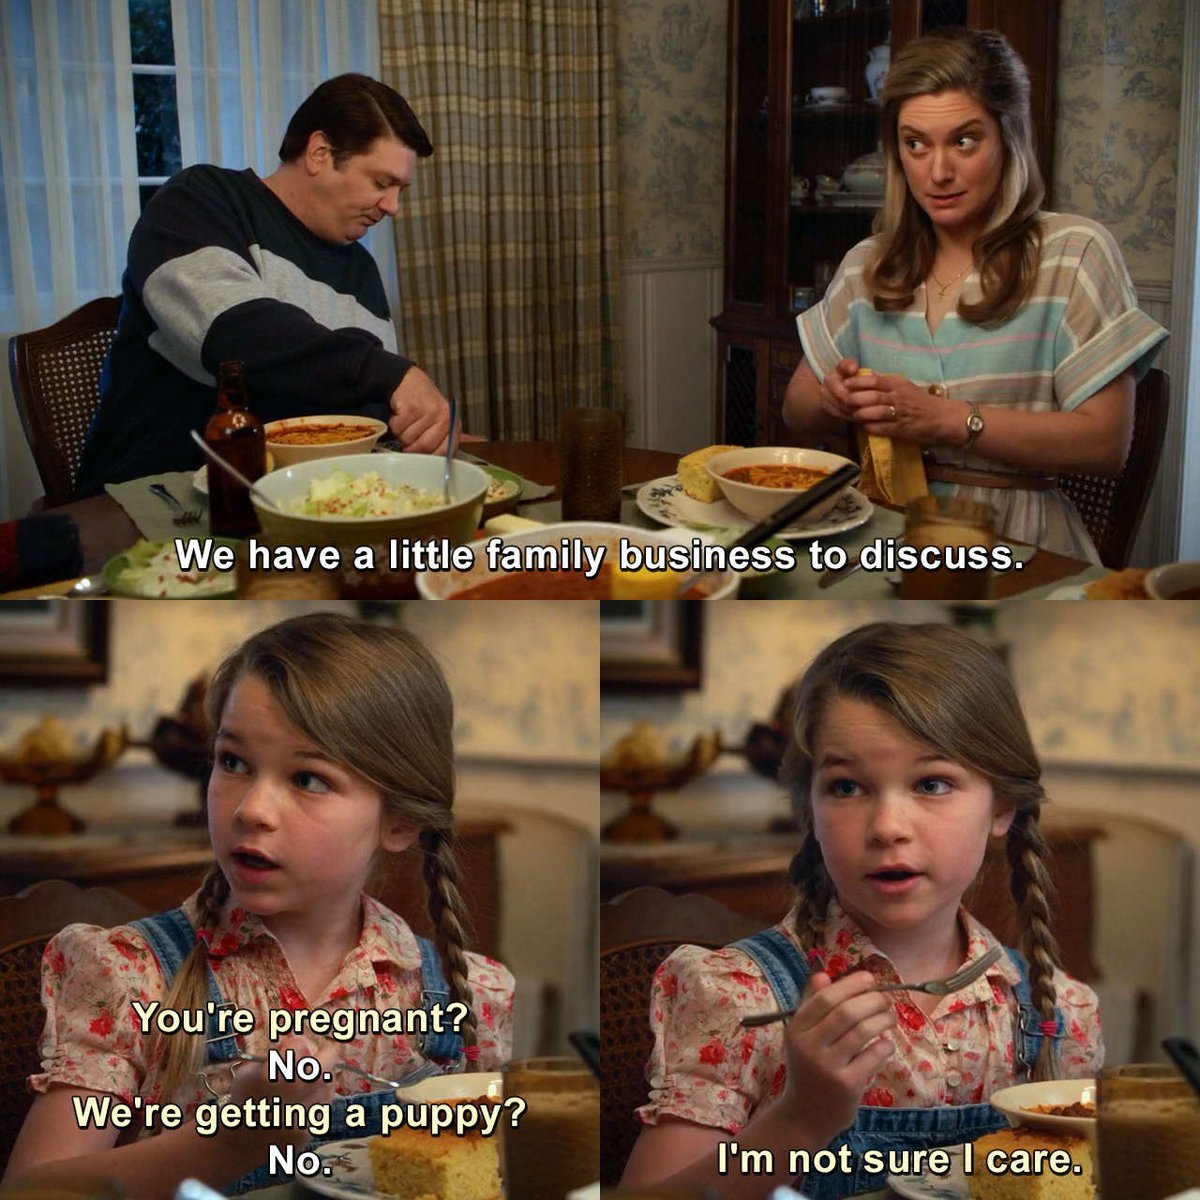 Missy is the most badass Cooper family member
#YoungSheldon #RaeganRevord